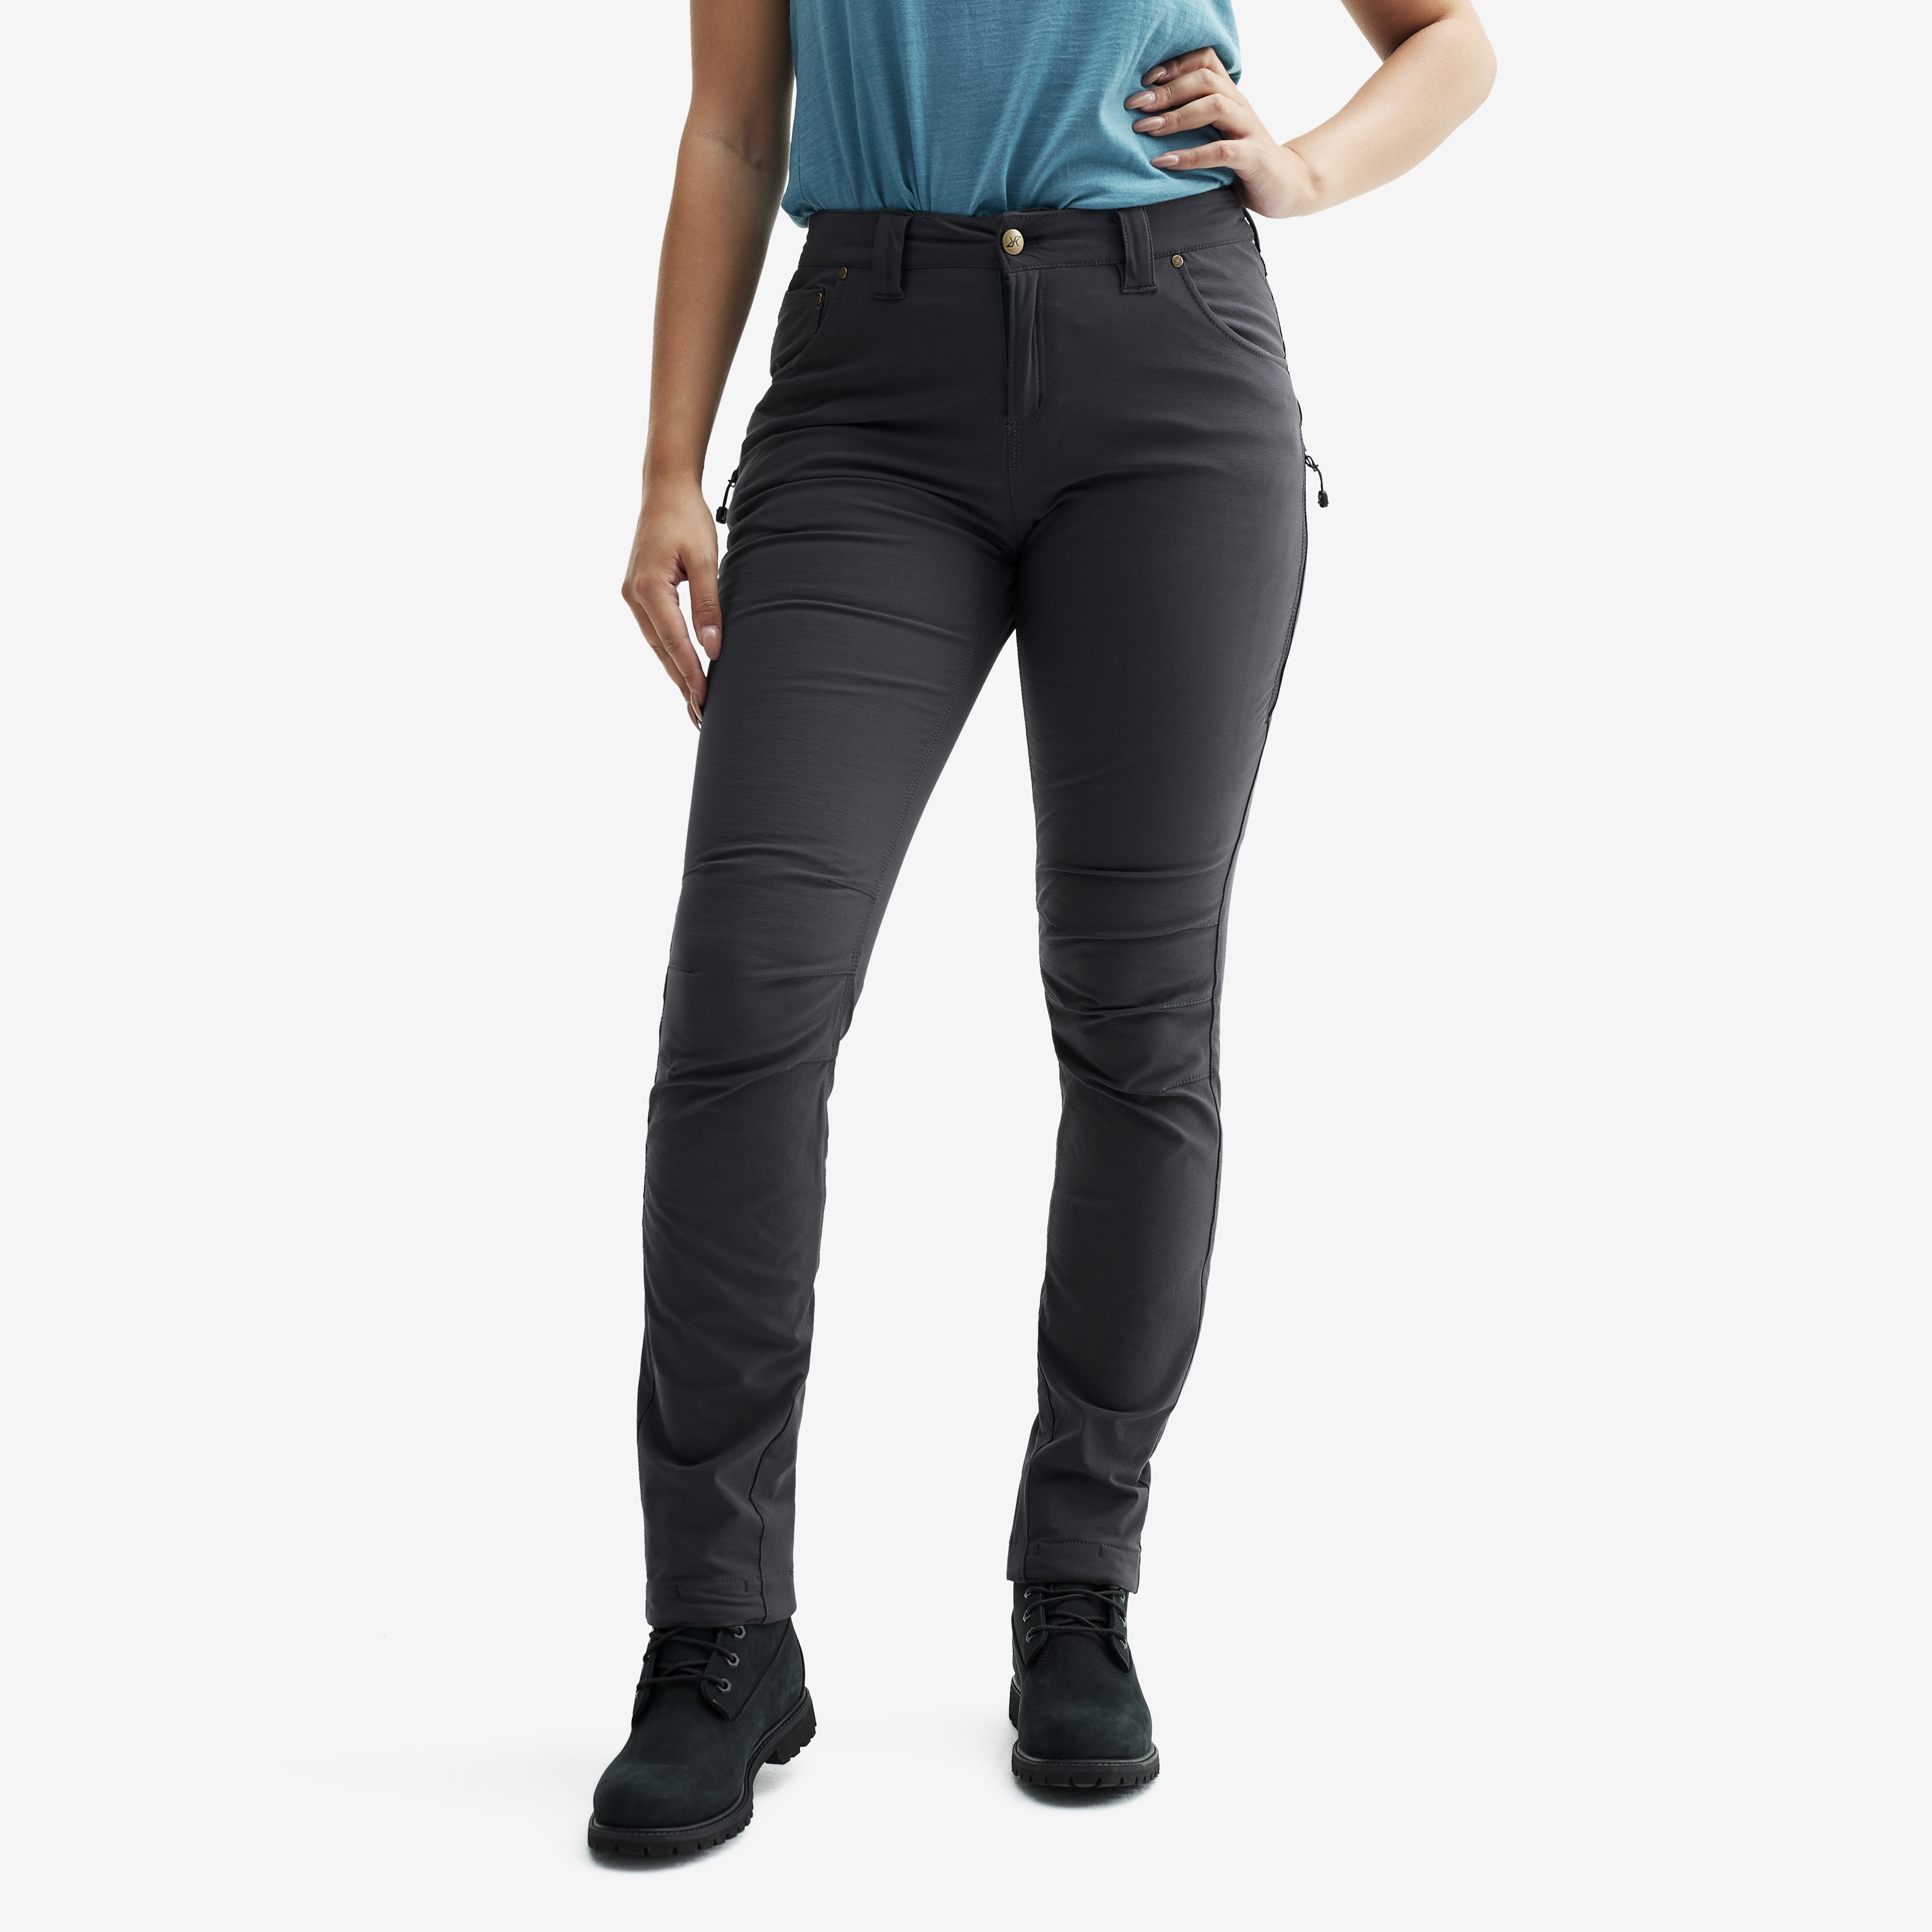 Adrenaline Outdoor Jeans Anthracite Edition Women